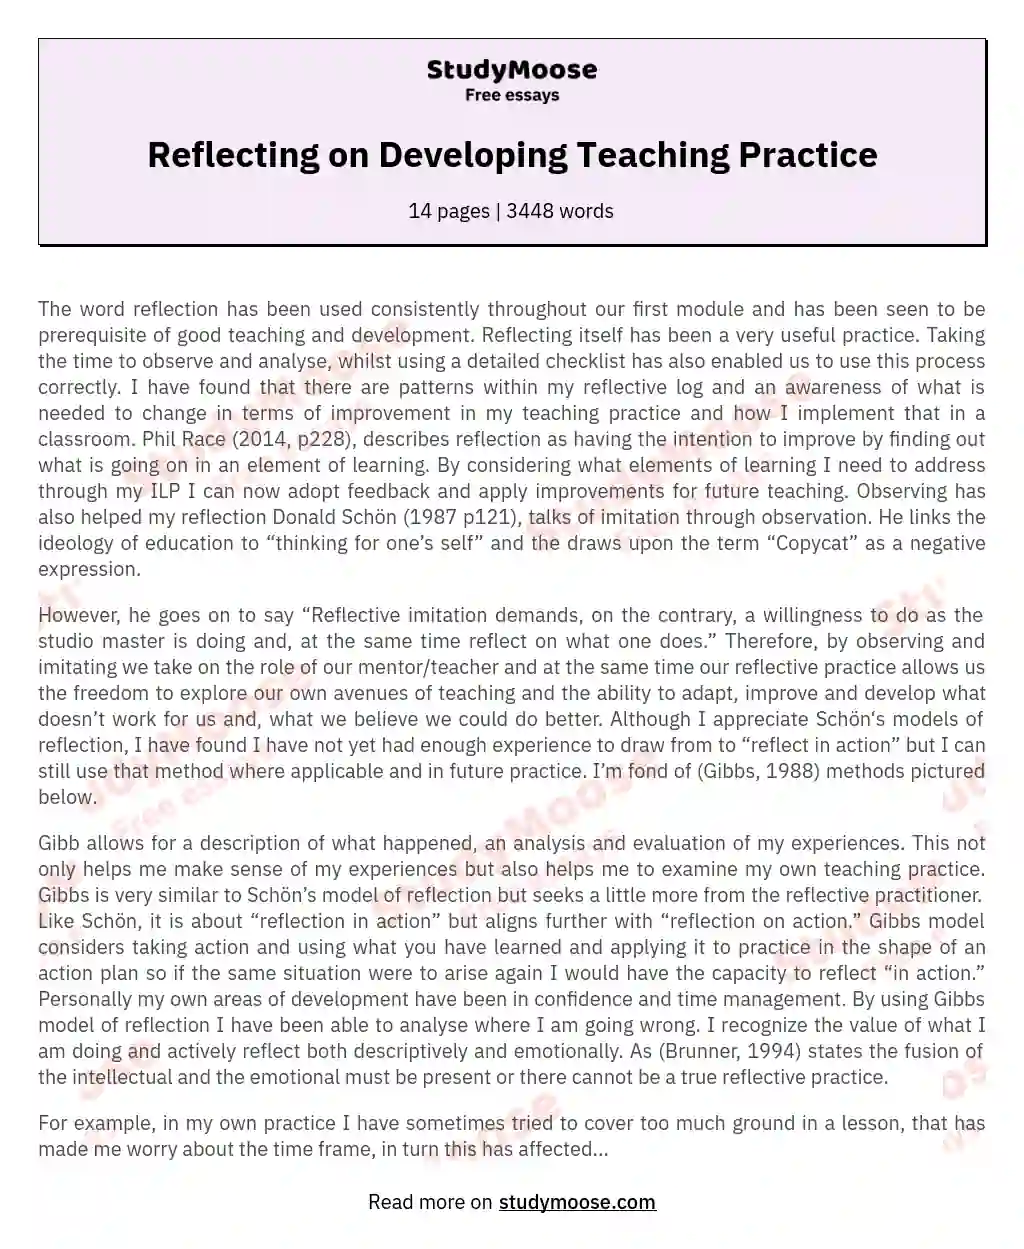 reflection essay about practice teaching